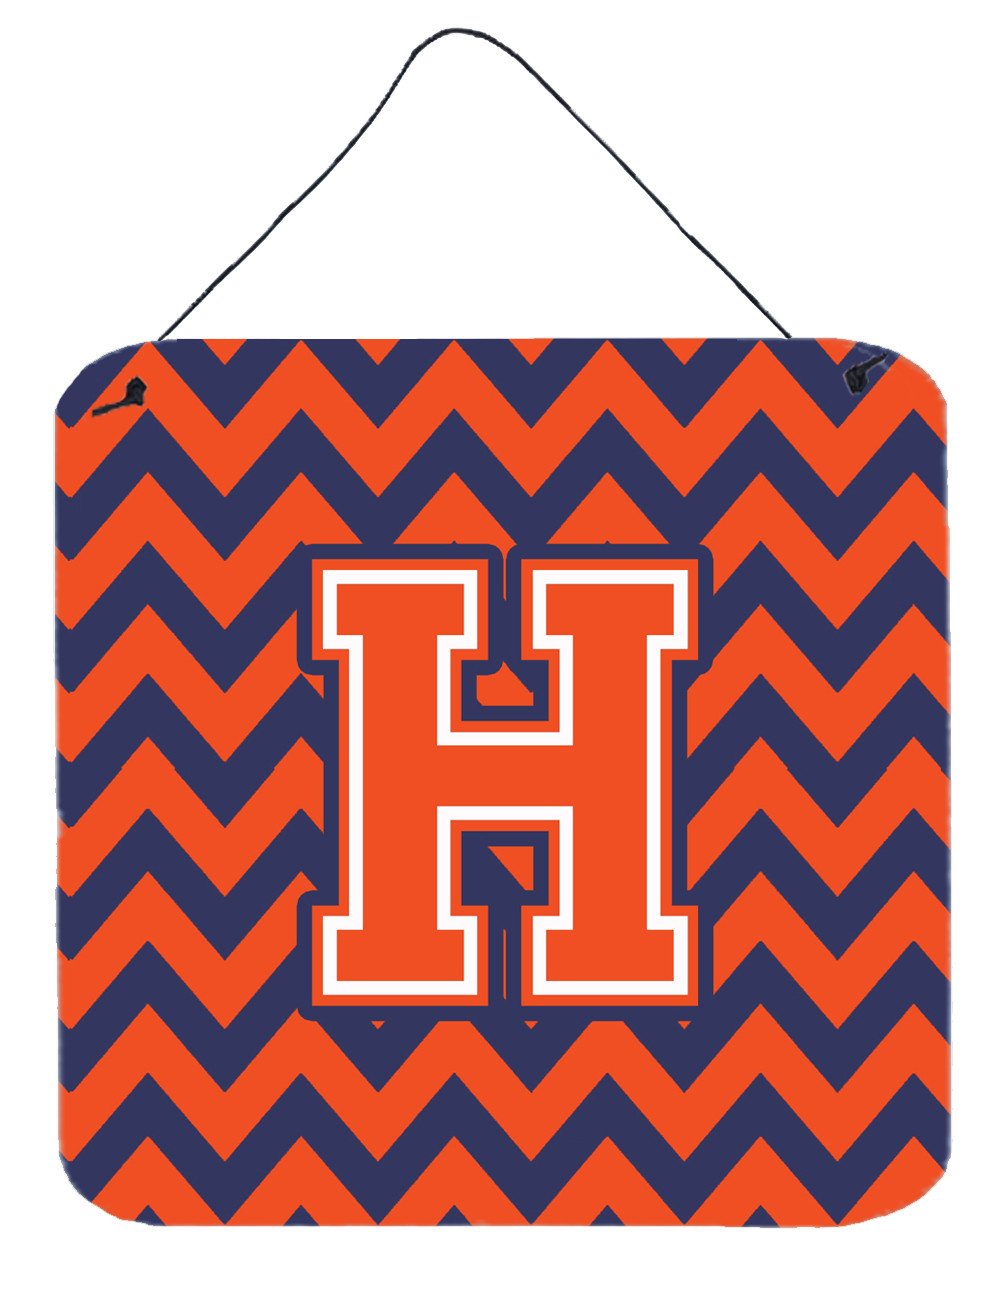 Letter H Chevron Orange and Blue Wall or Door Hanging Prints CJ1042-HDS66 by Caroline's Treasures